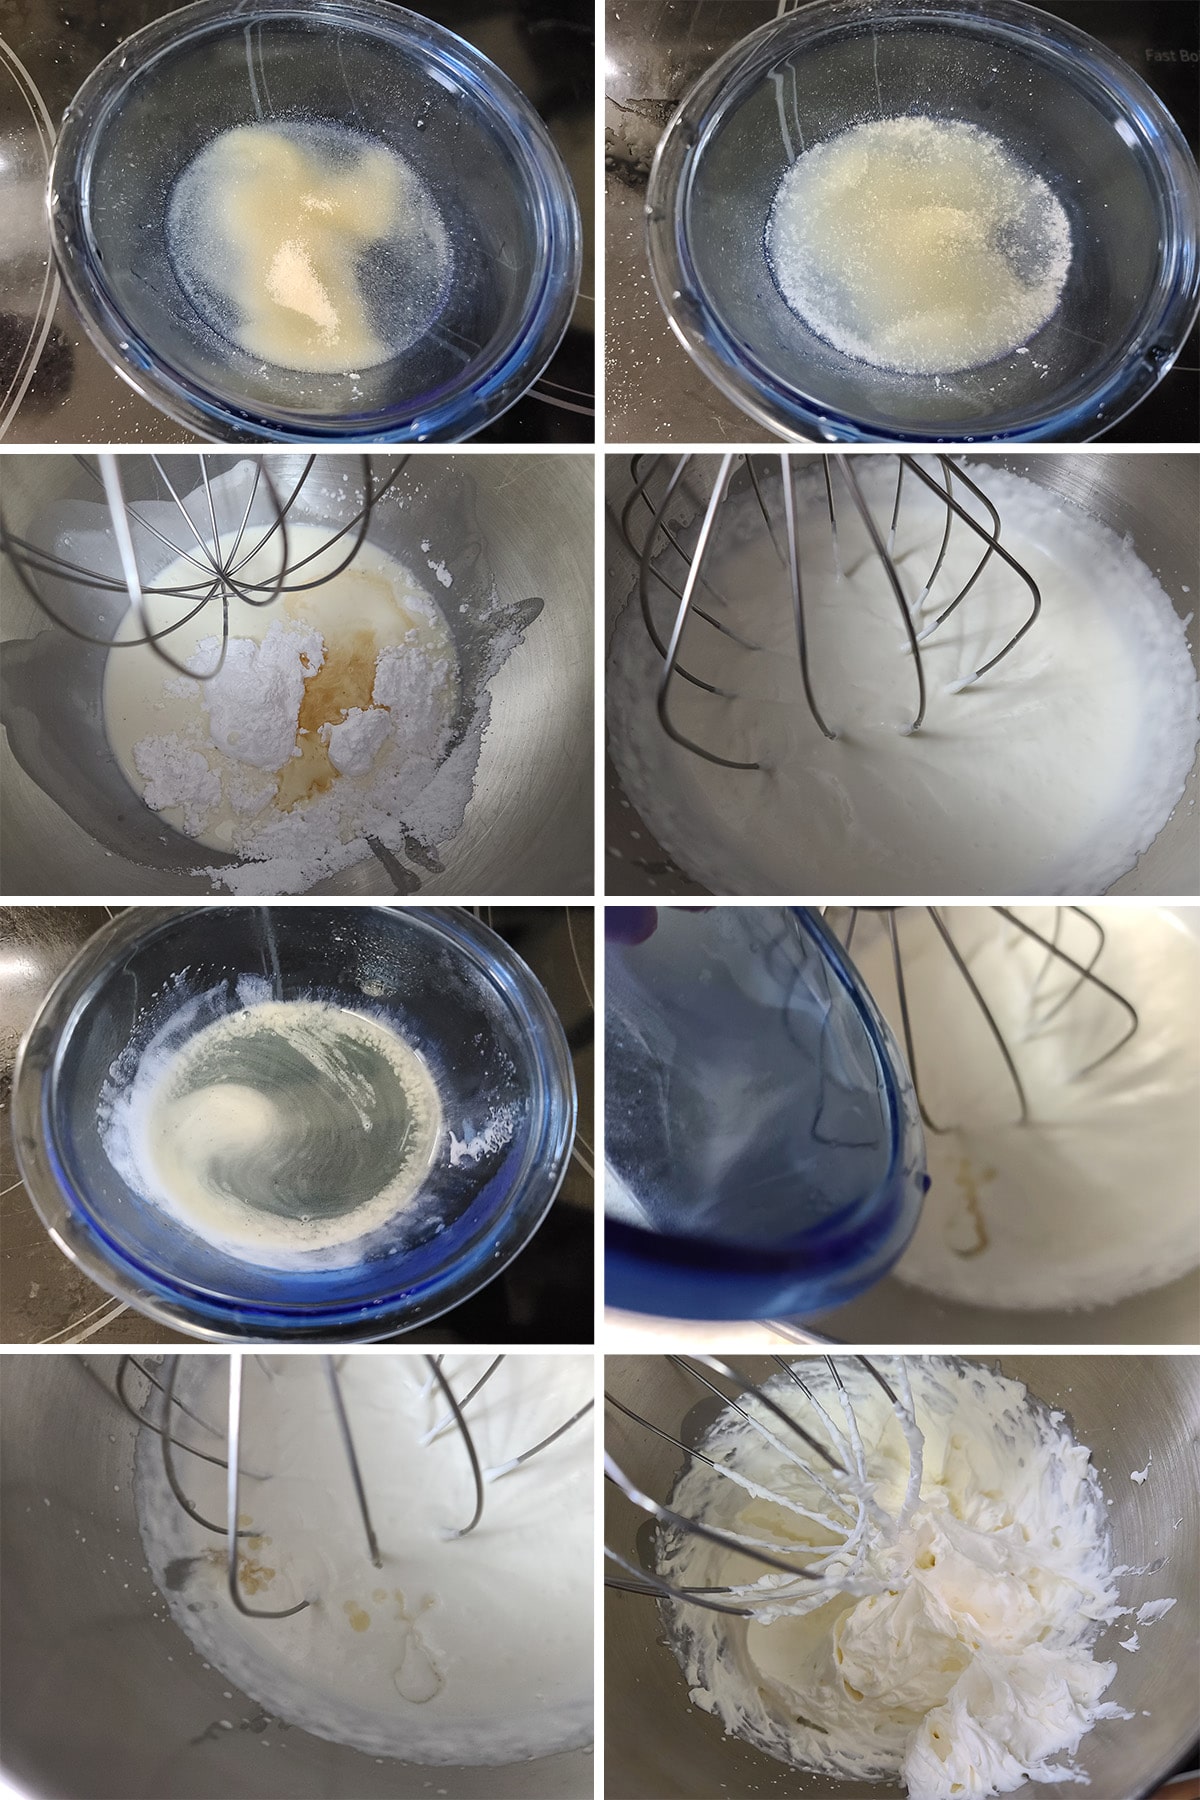 An 8 part image showing the steps to make stabilized whipped cream.